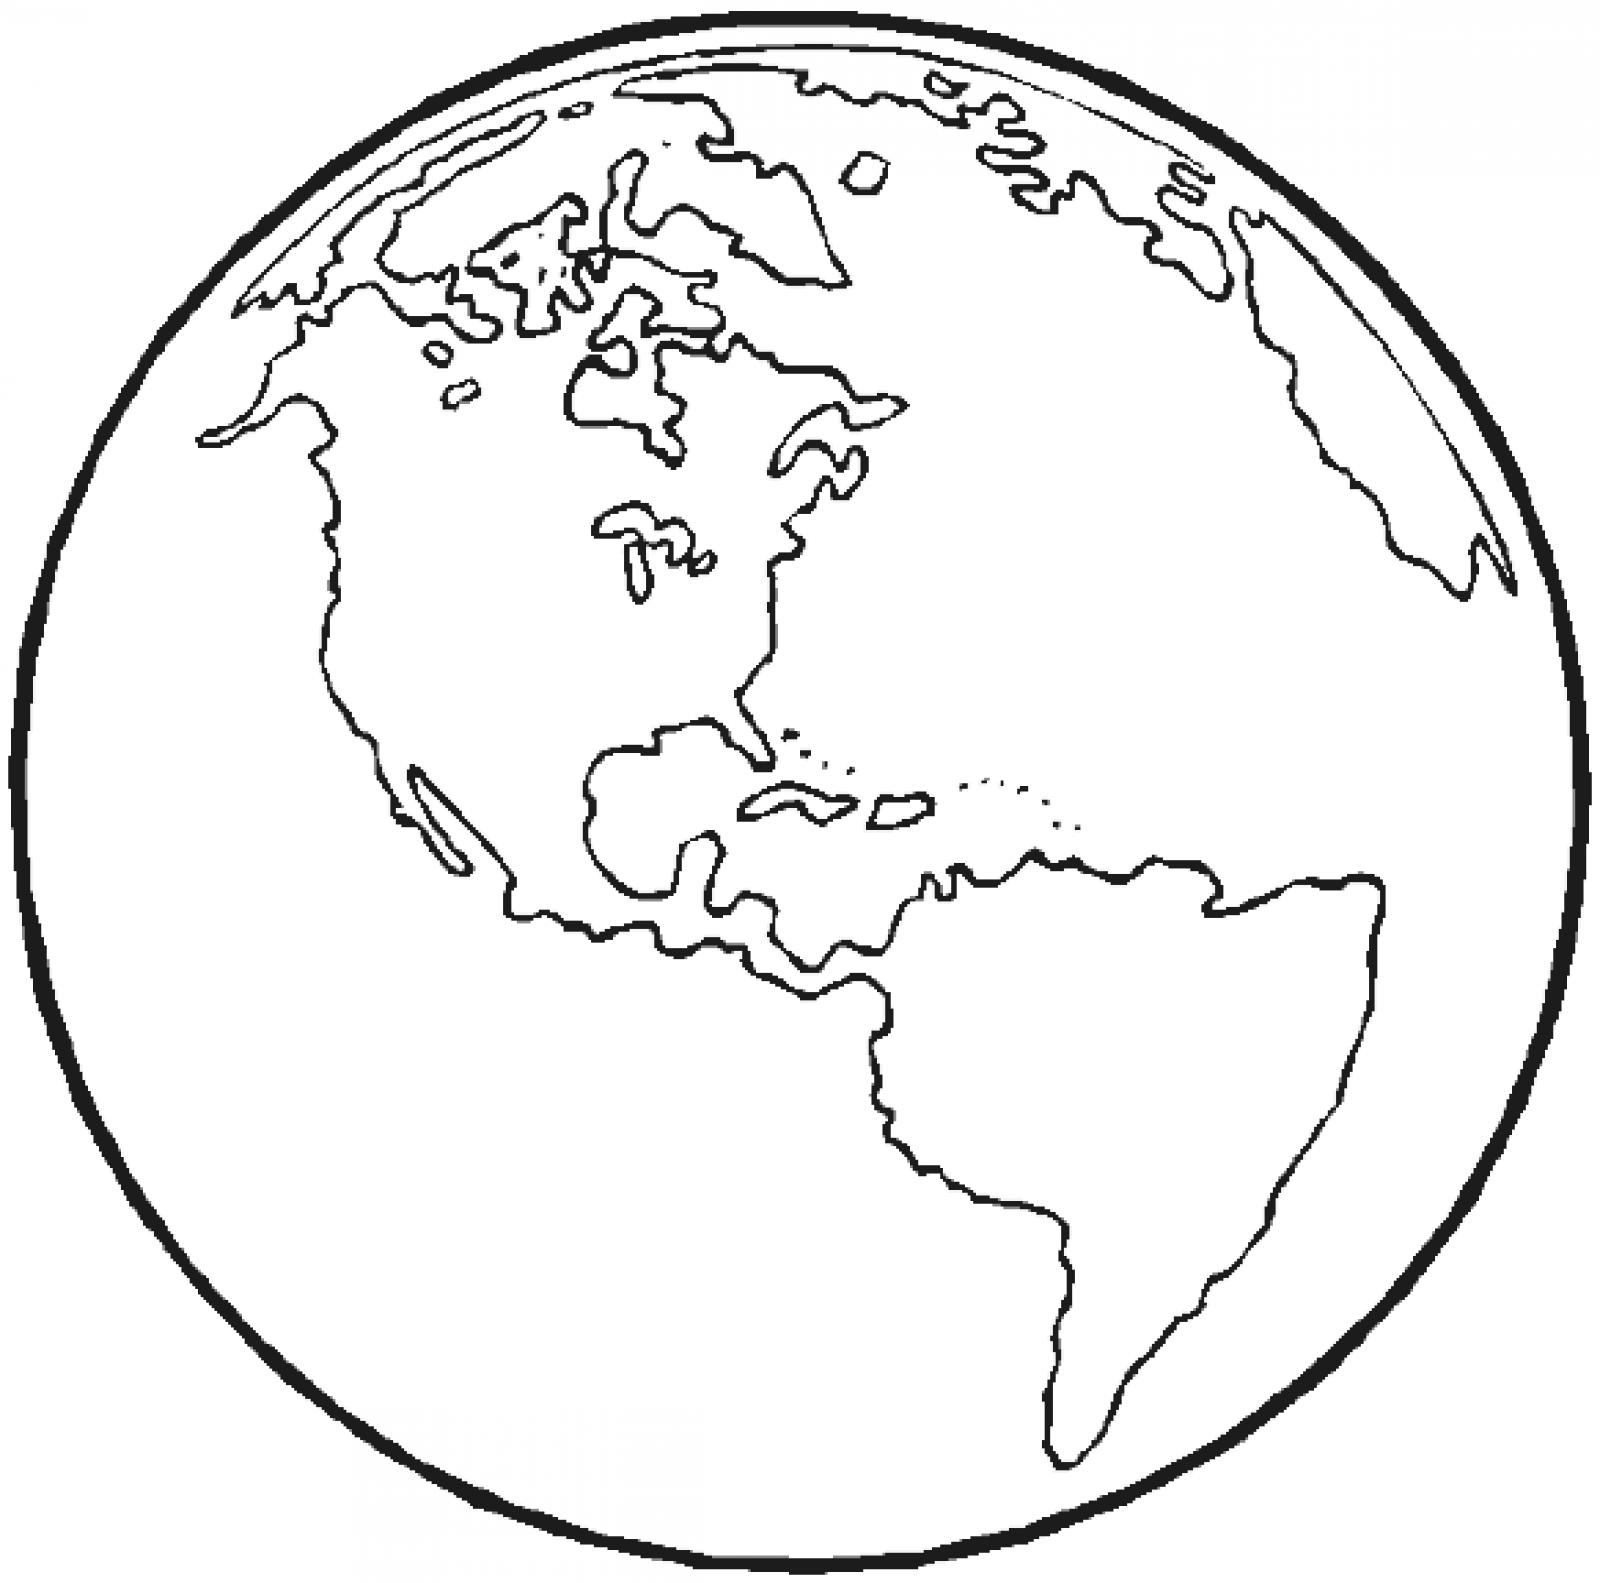 World Coloring Pages Printable at GetDrawings Free download